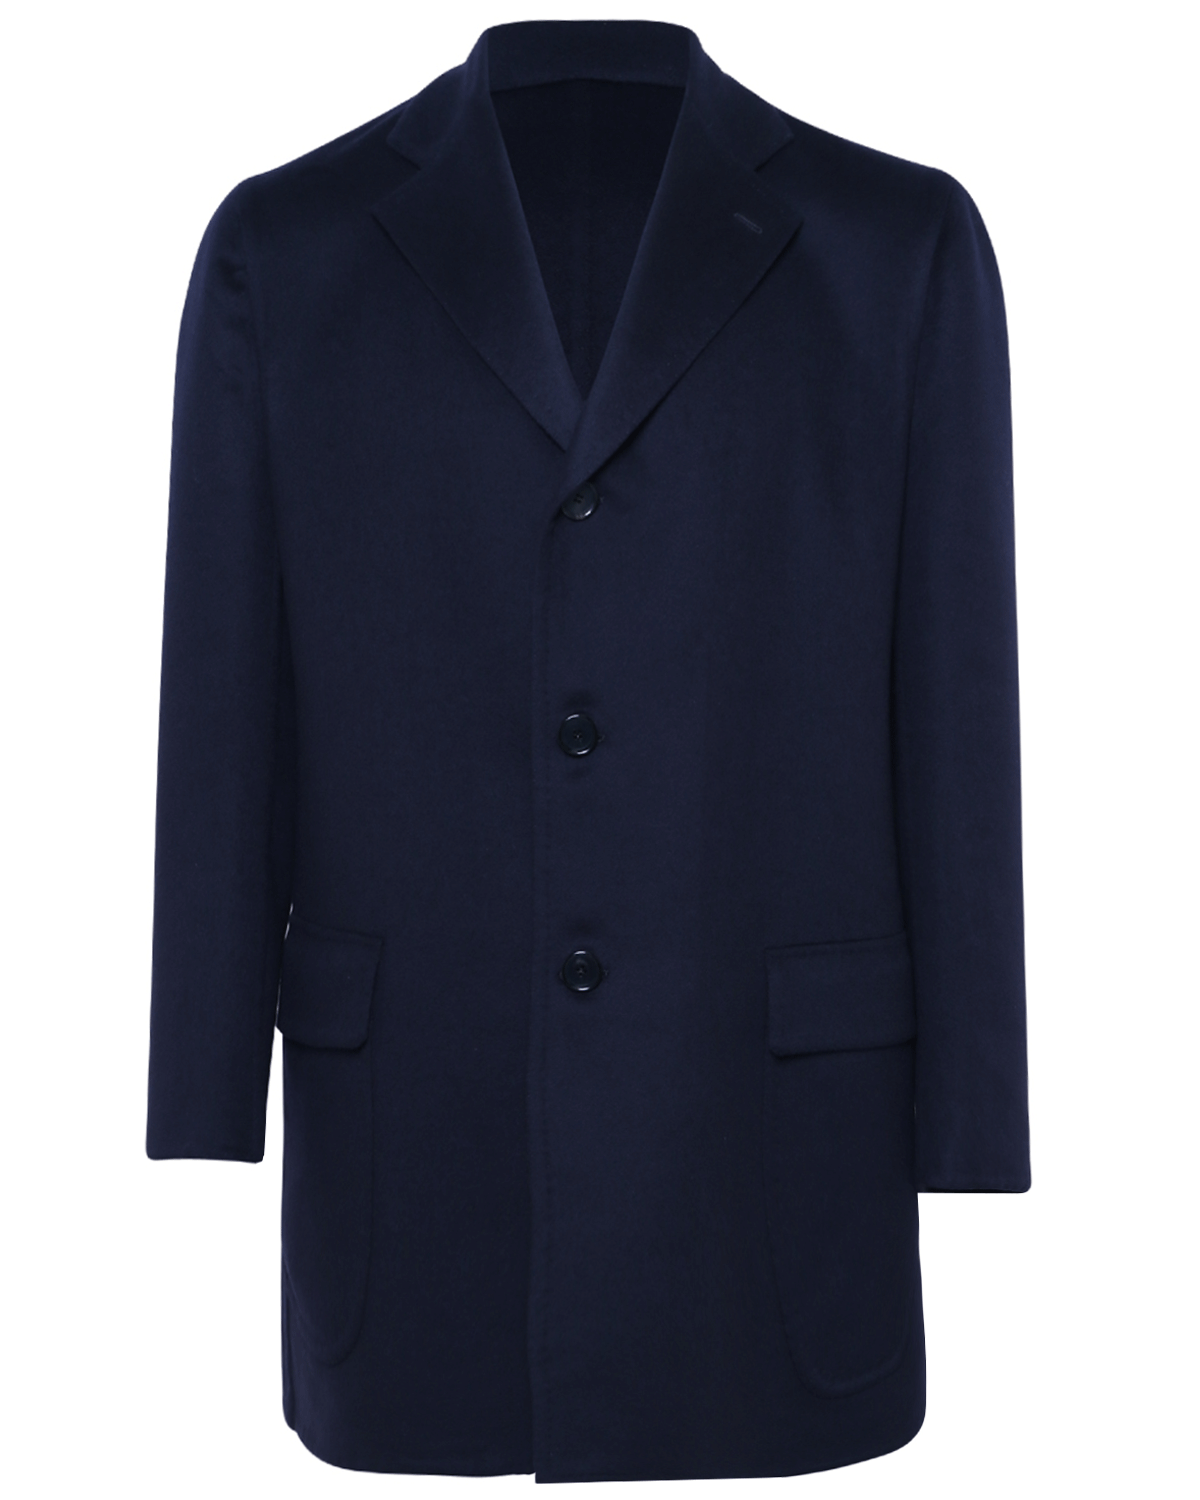 Navy Double Face Cashmere Carcoat